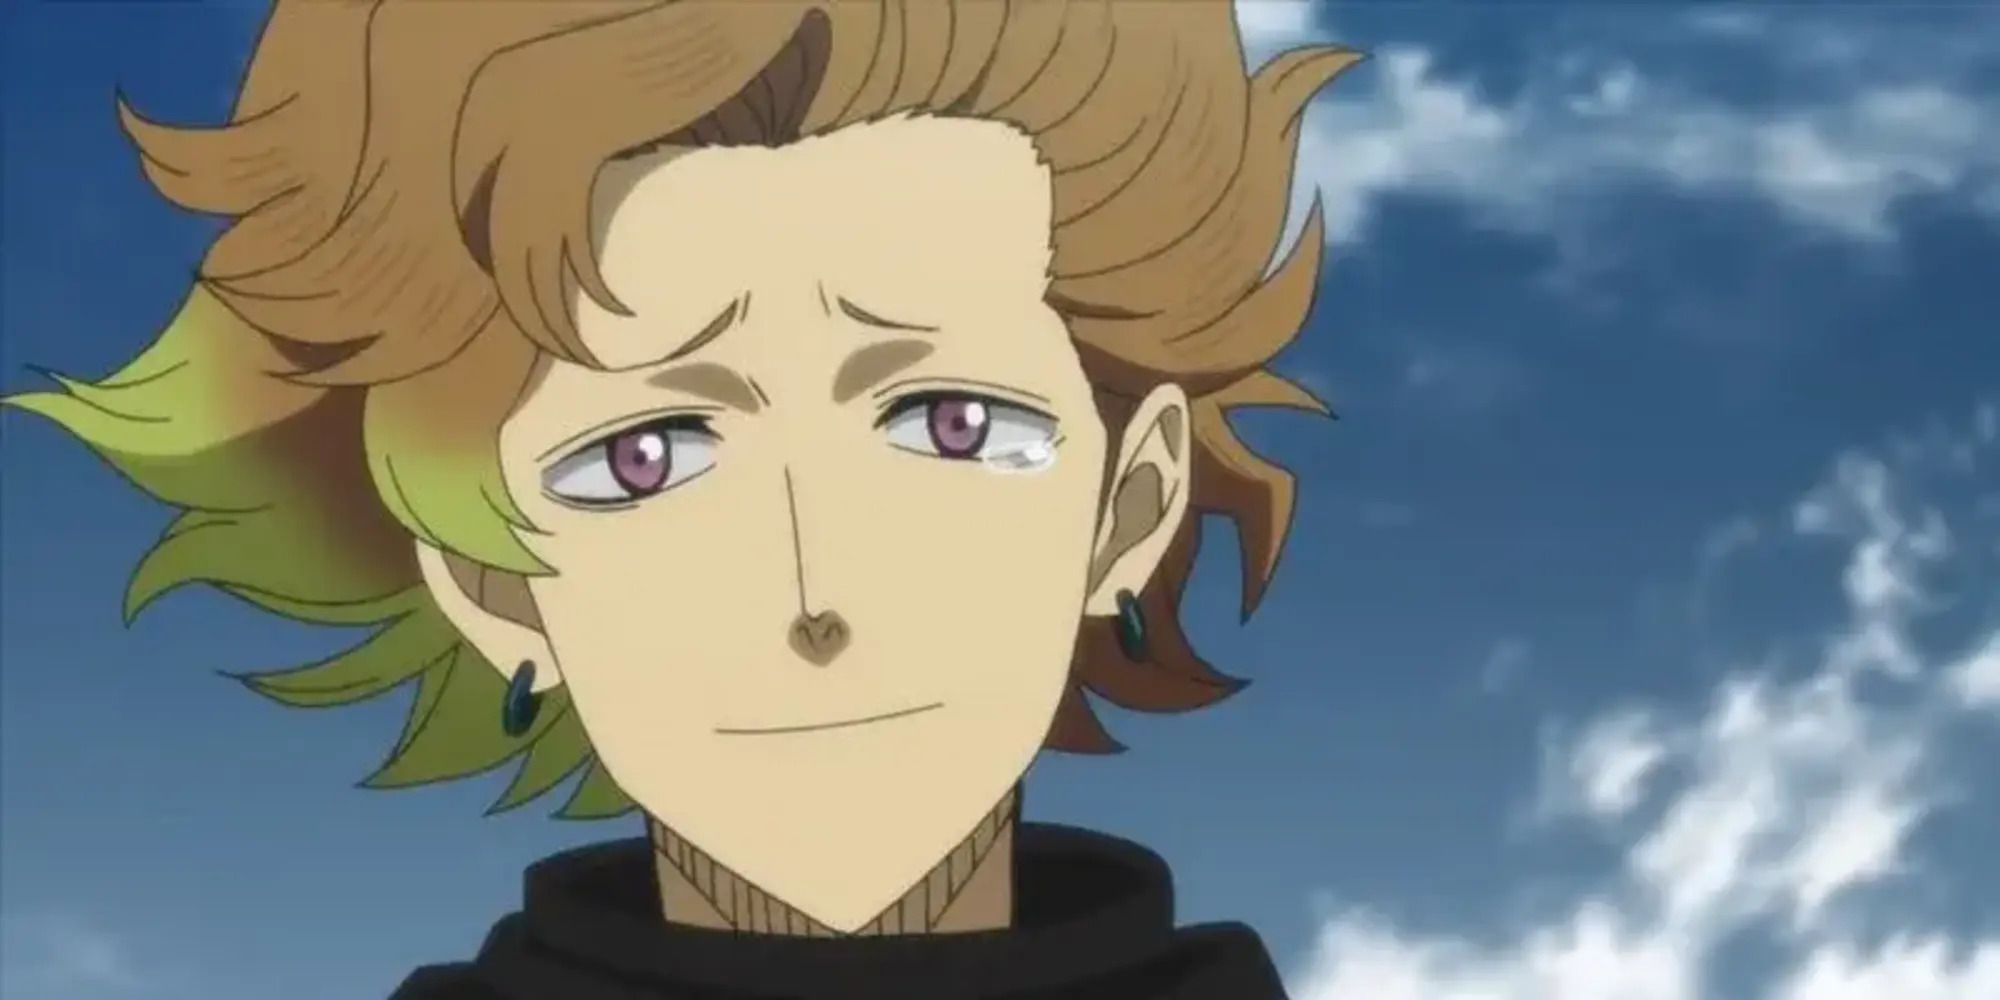 Finral Roulacase From Black Clover with a tear in his eye